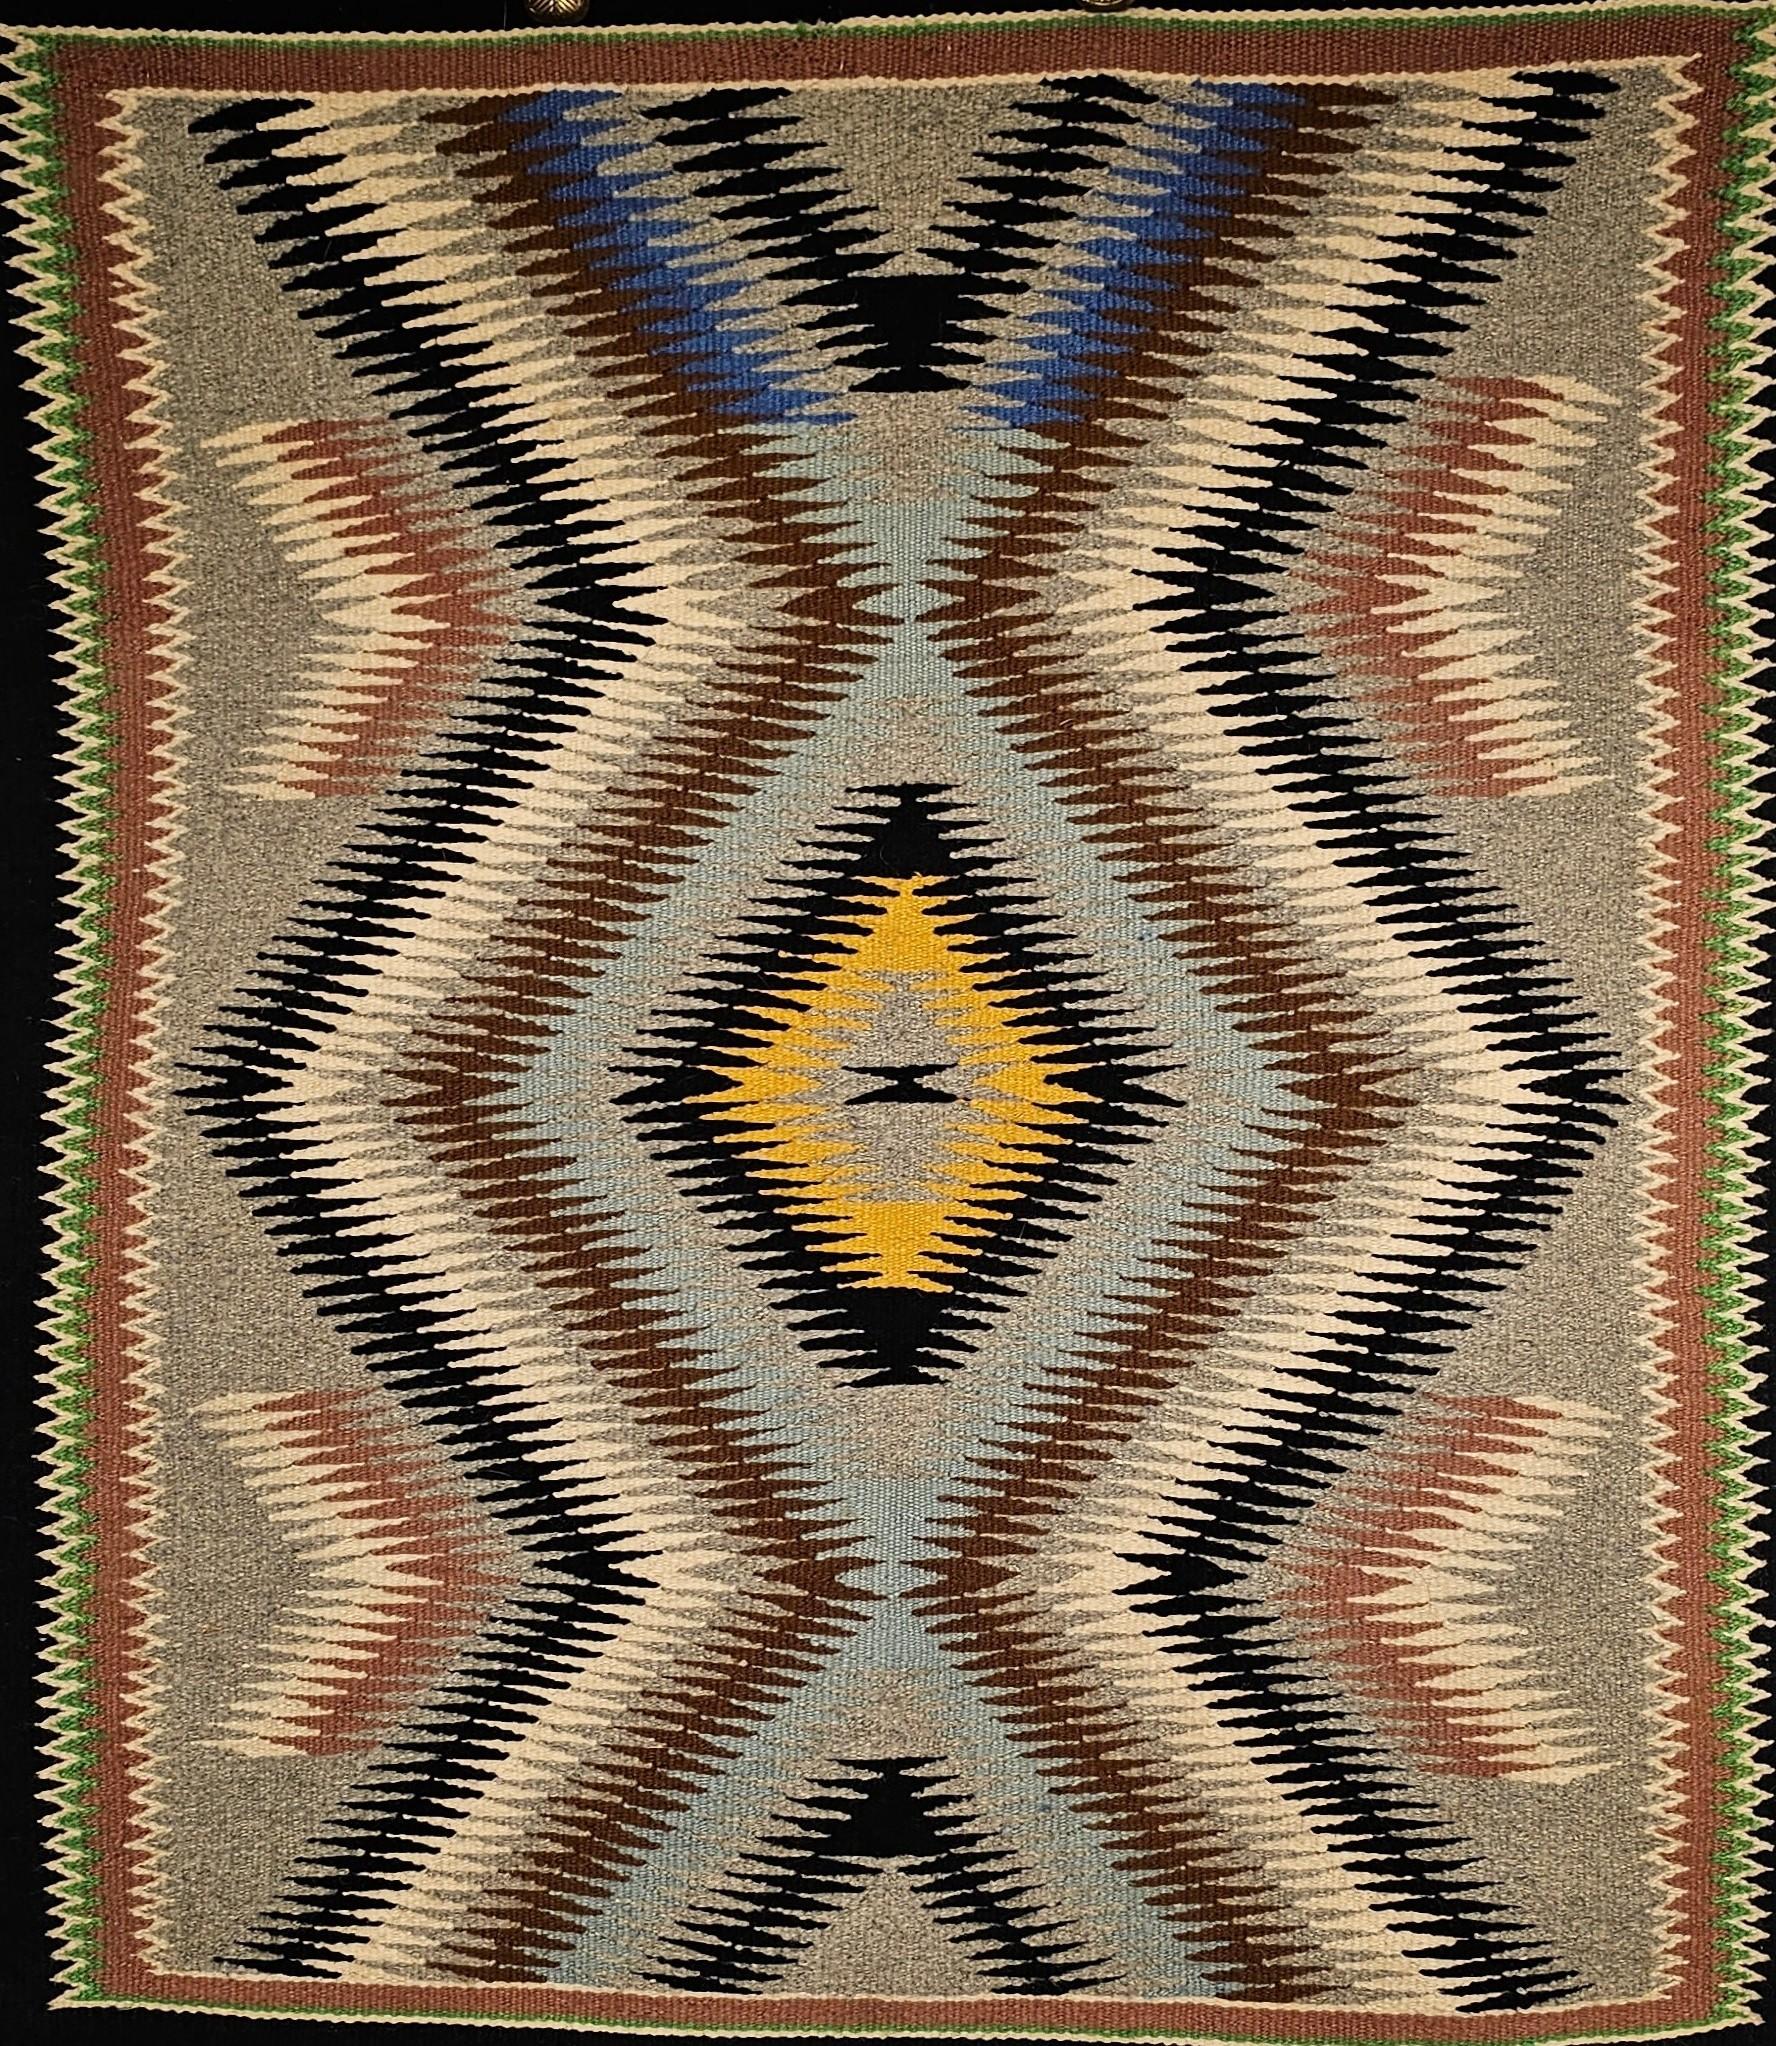 Very fine weave vintage Native American Navajo rug is in an “Eye Dazzler” pattern from the mid 1900s.  The natural colors in this Navajo rug are in beautiful earth tones including brown, black, and gray.    Navajo weavers use natural organic dyes